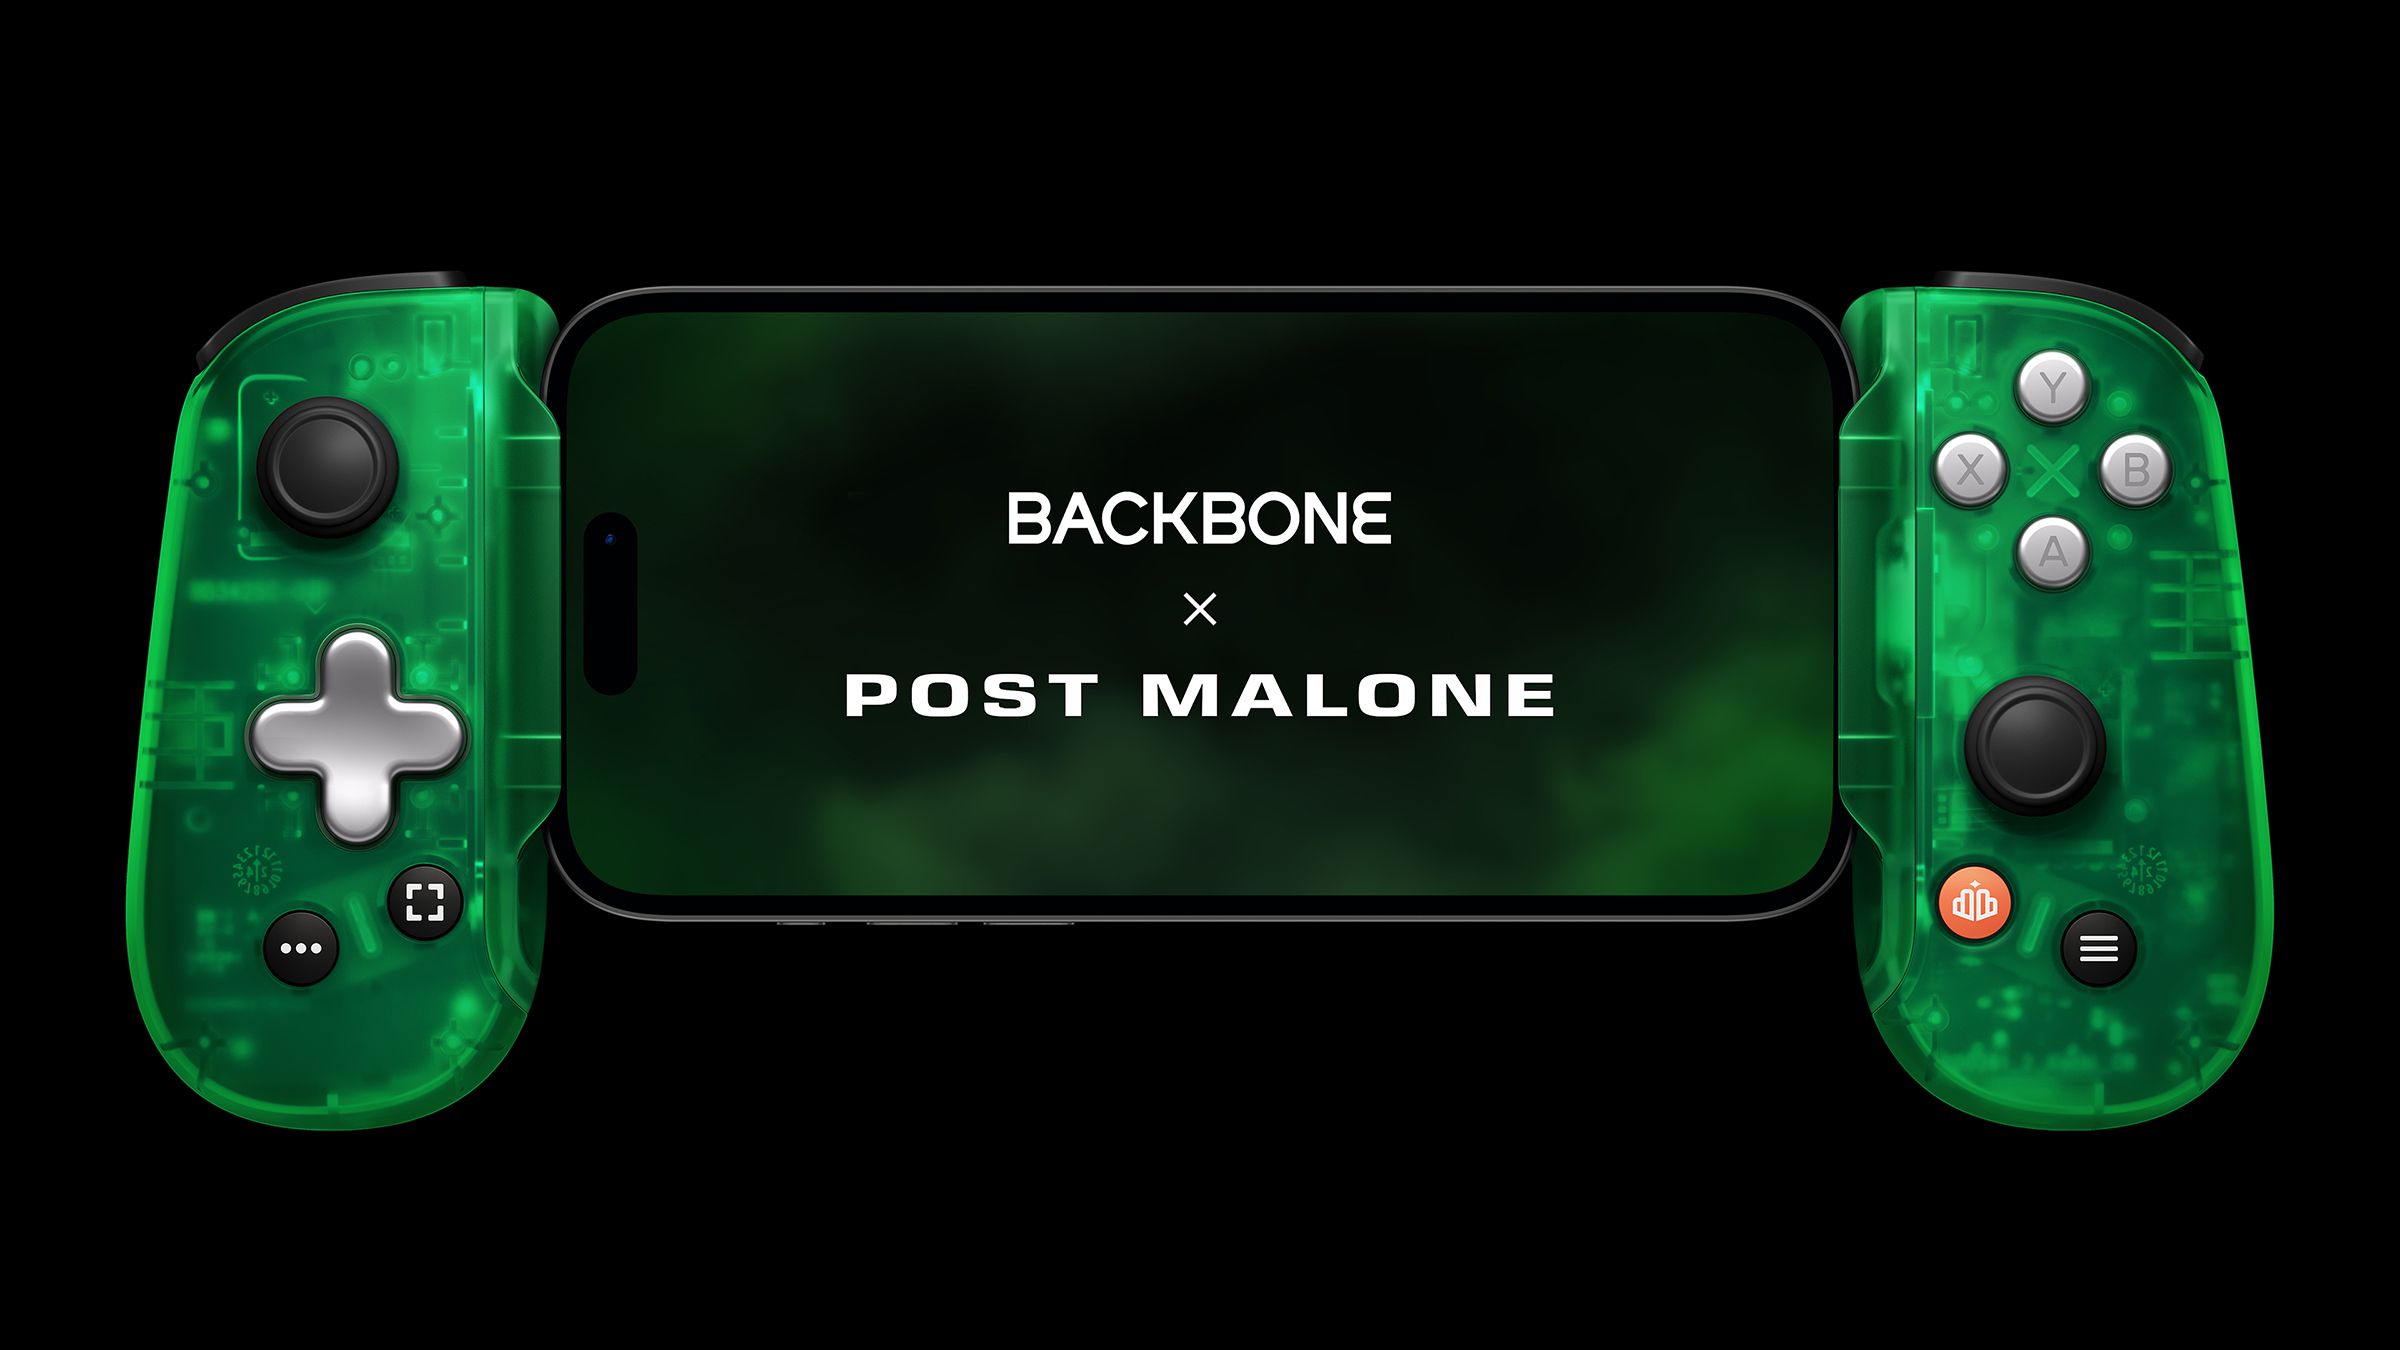 The Backbone&nbsp;One: Post Malone Limited Edition Controller with an iPhone connected.